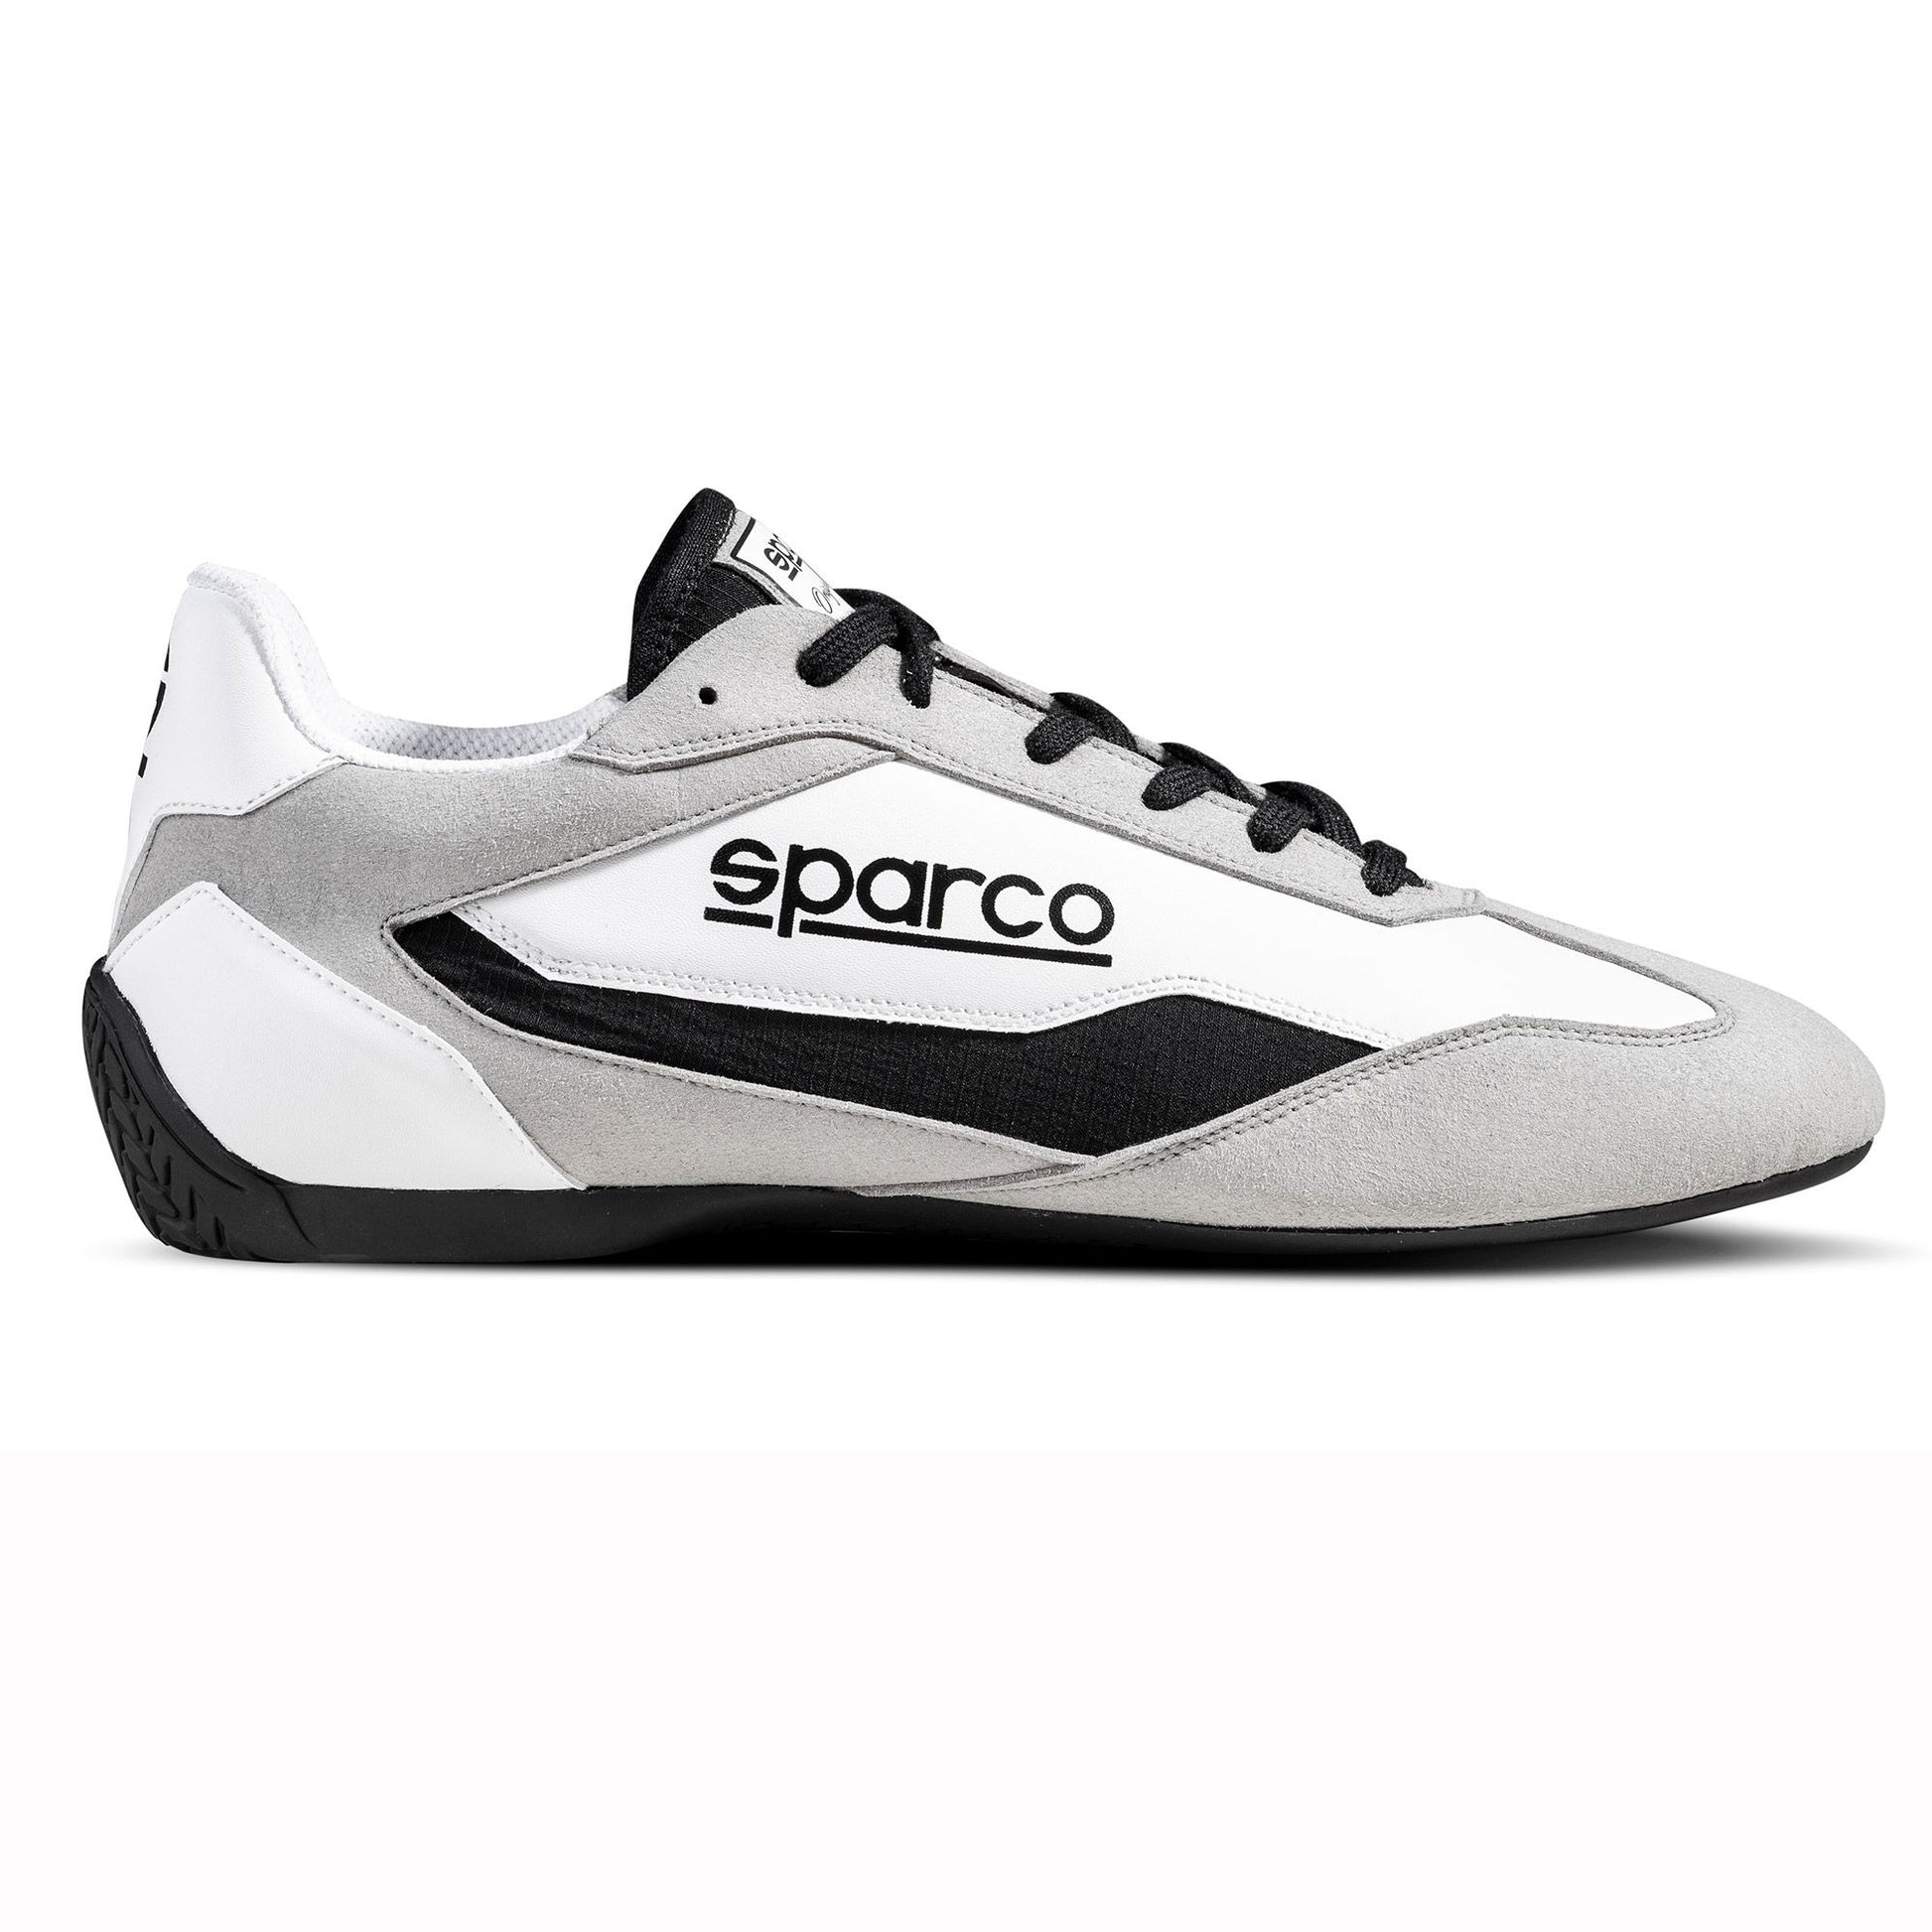 0012A7 New Sparco S-DRIVE Trainers Shoes Sneakers Microfibre Low